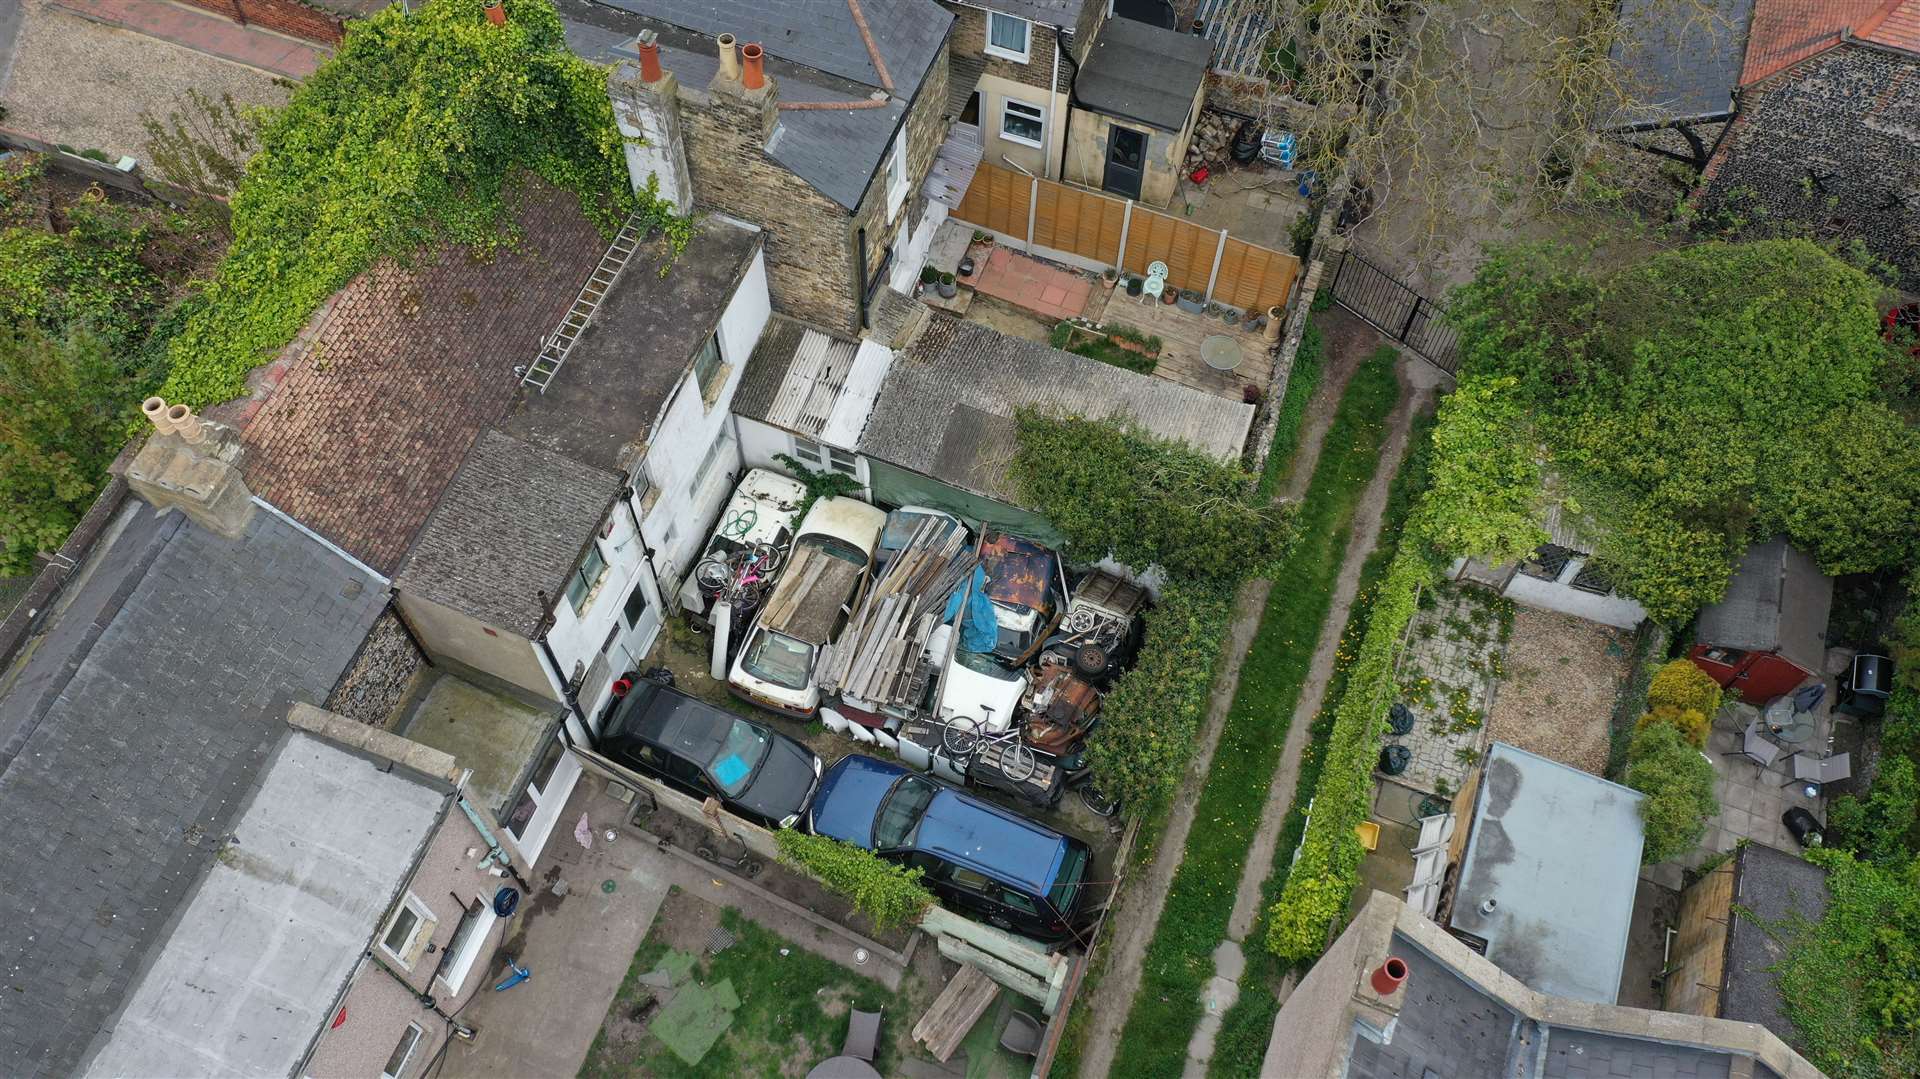 An aerial view showing the rear yard of the home. Picture UKNIP